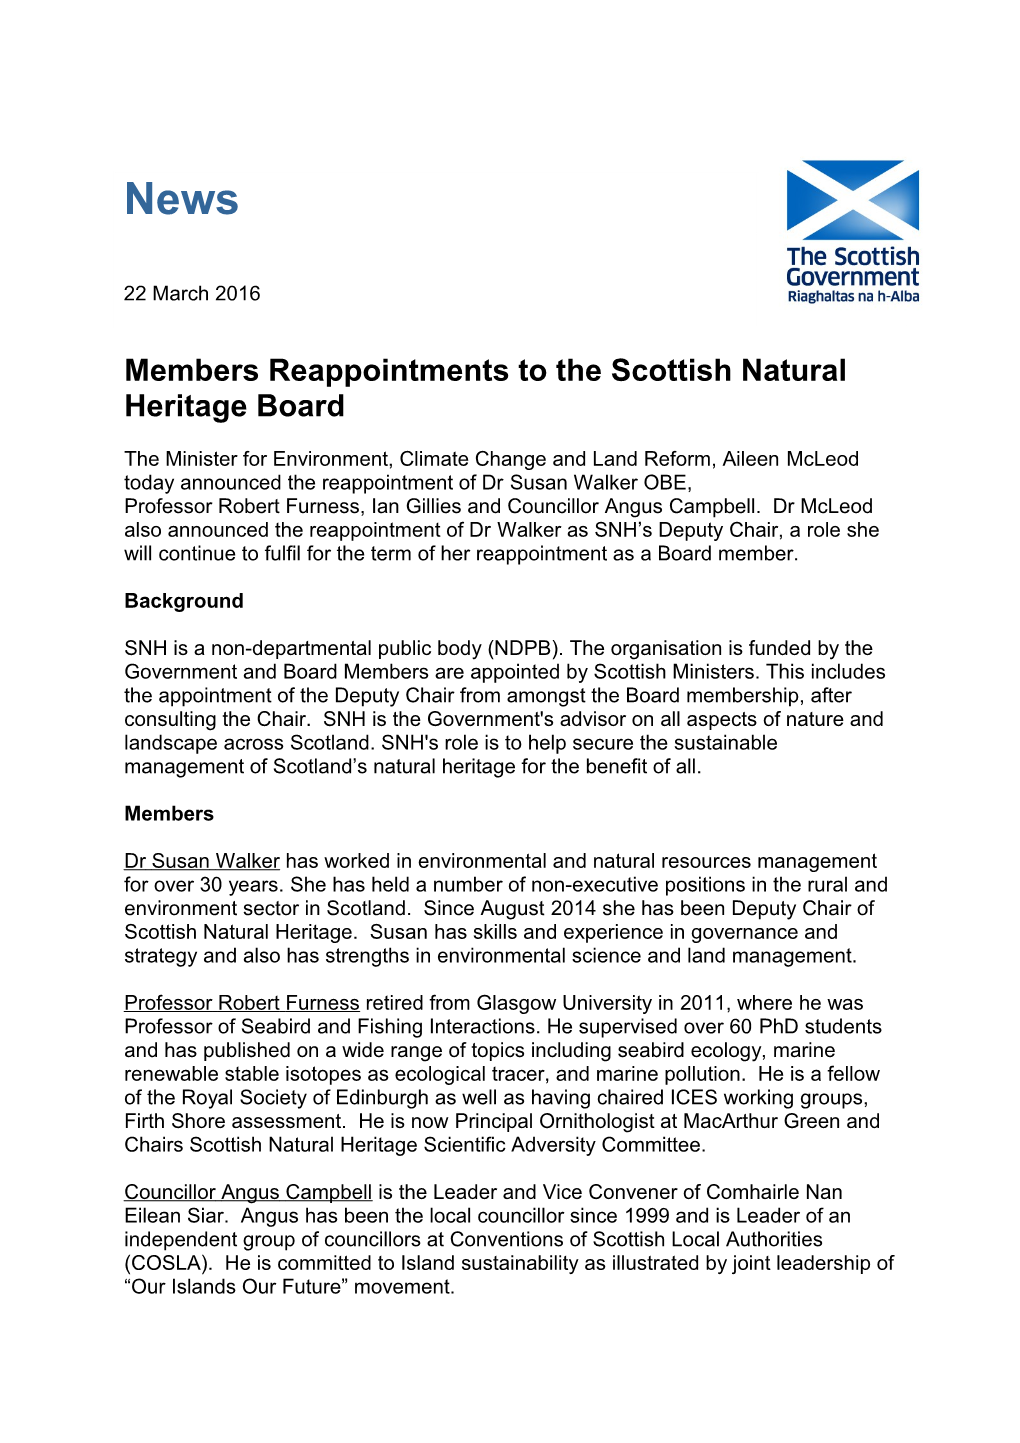 Members Reappointments to the Scottish Natural Heritage Board